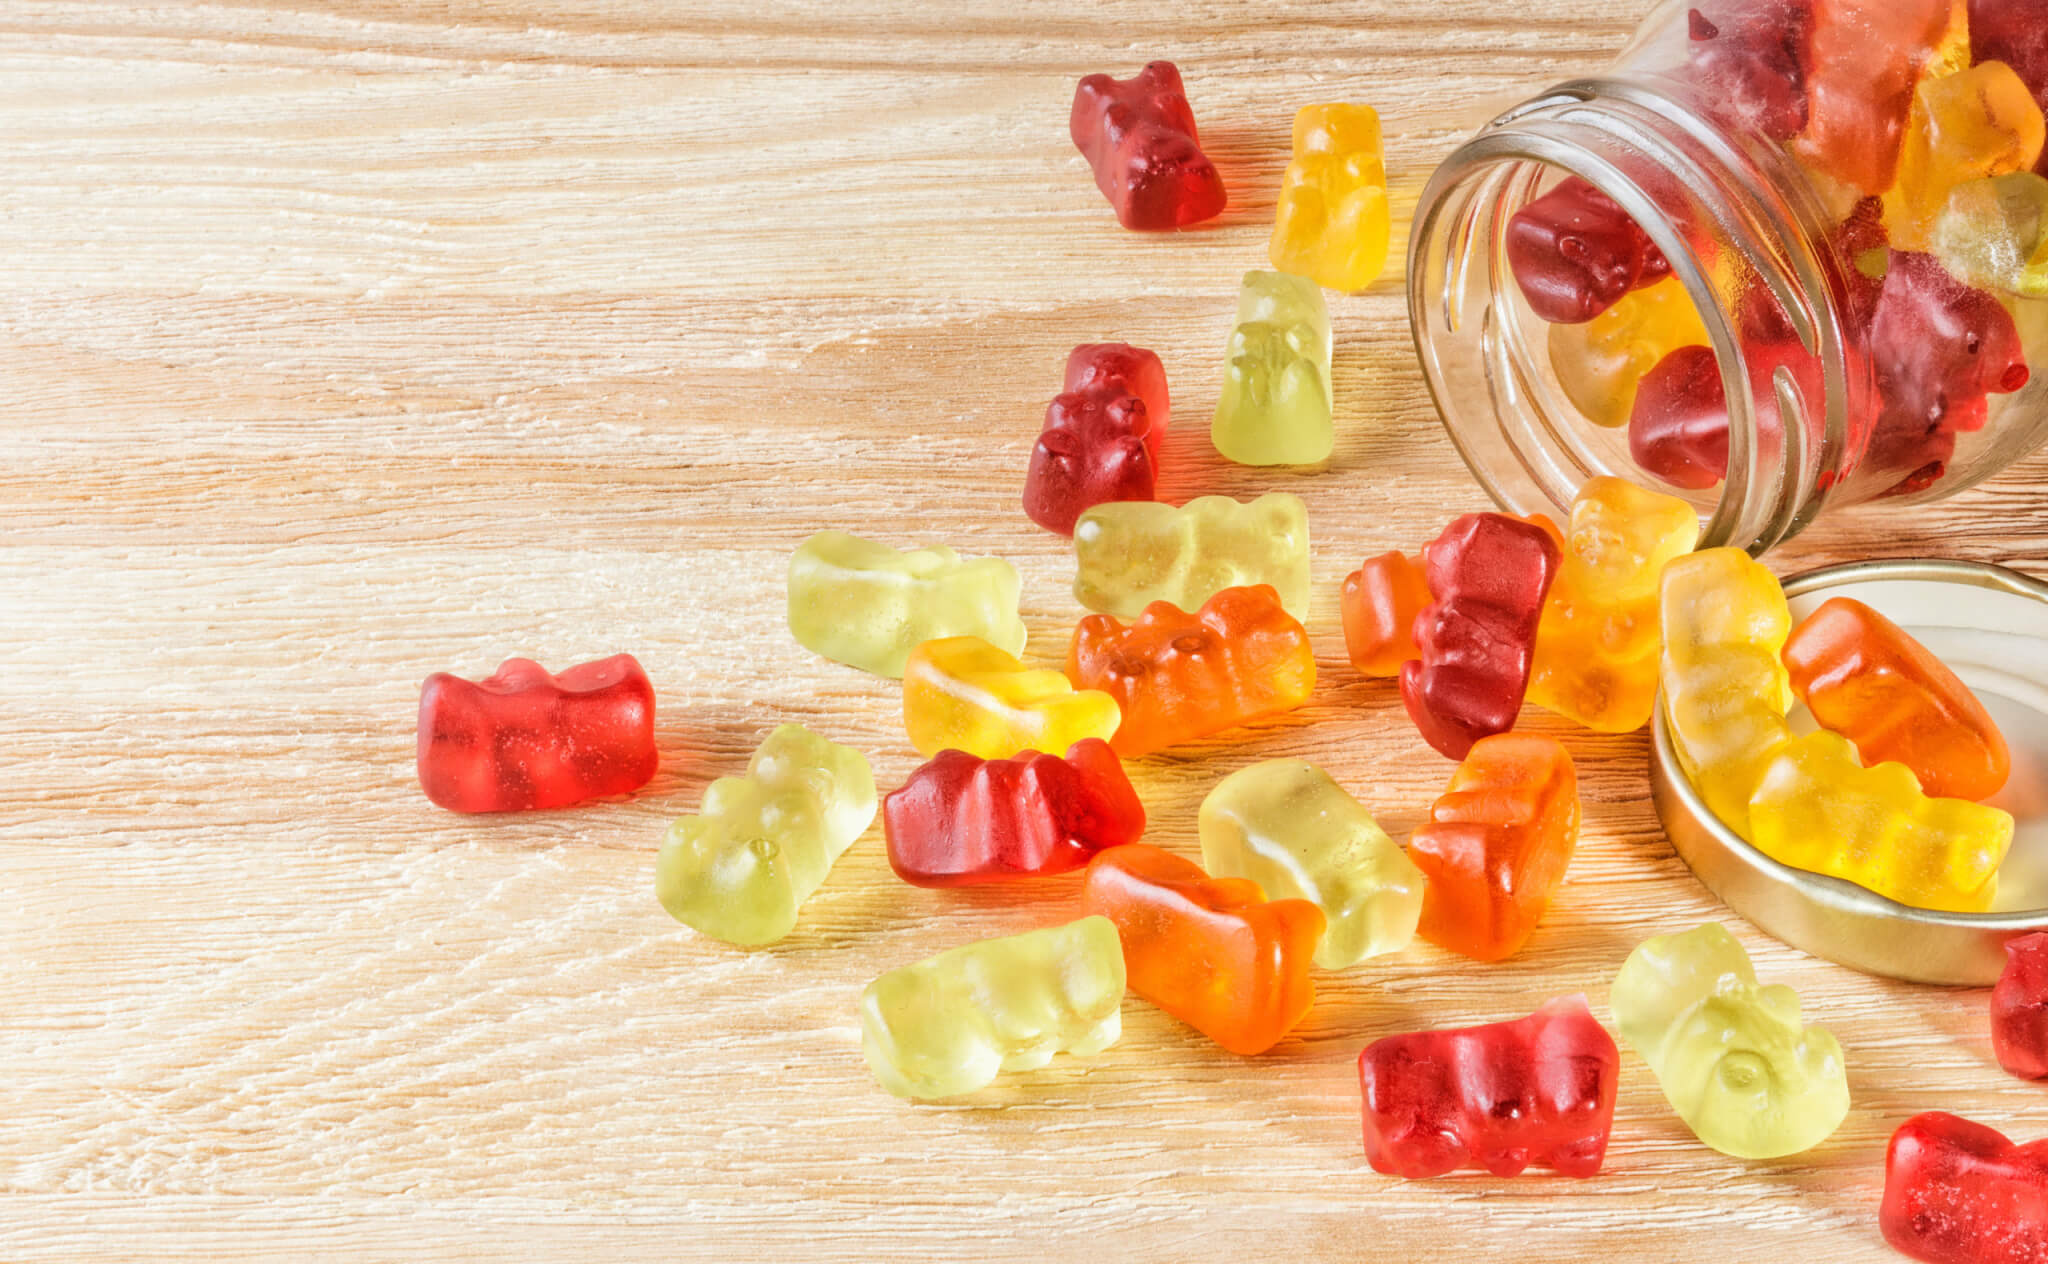 Best Children’s Vitamins: Top 5 Kids Gummy Multivitamins Most Recommended By Experts